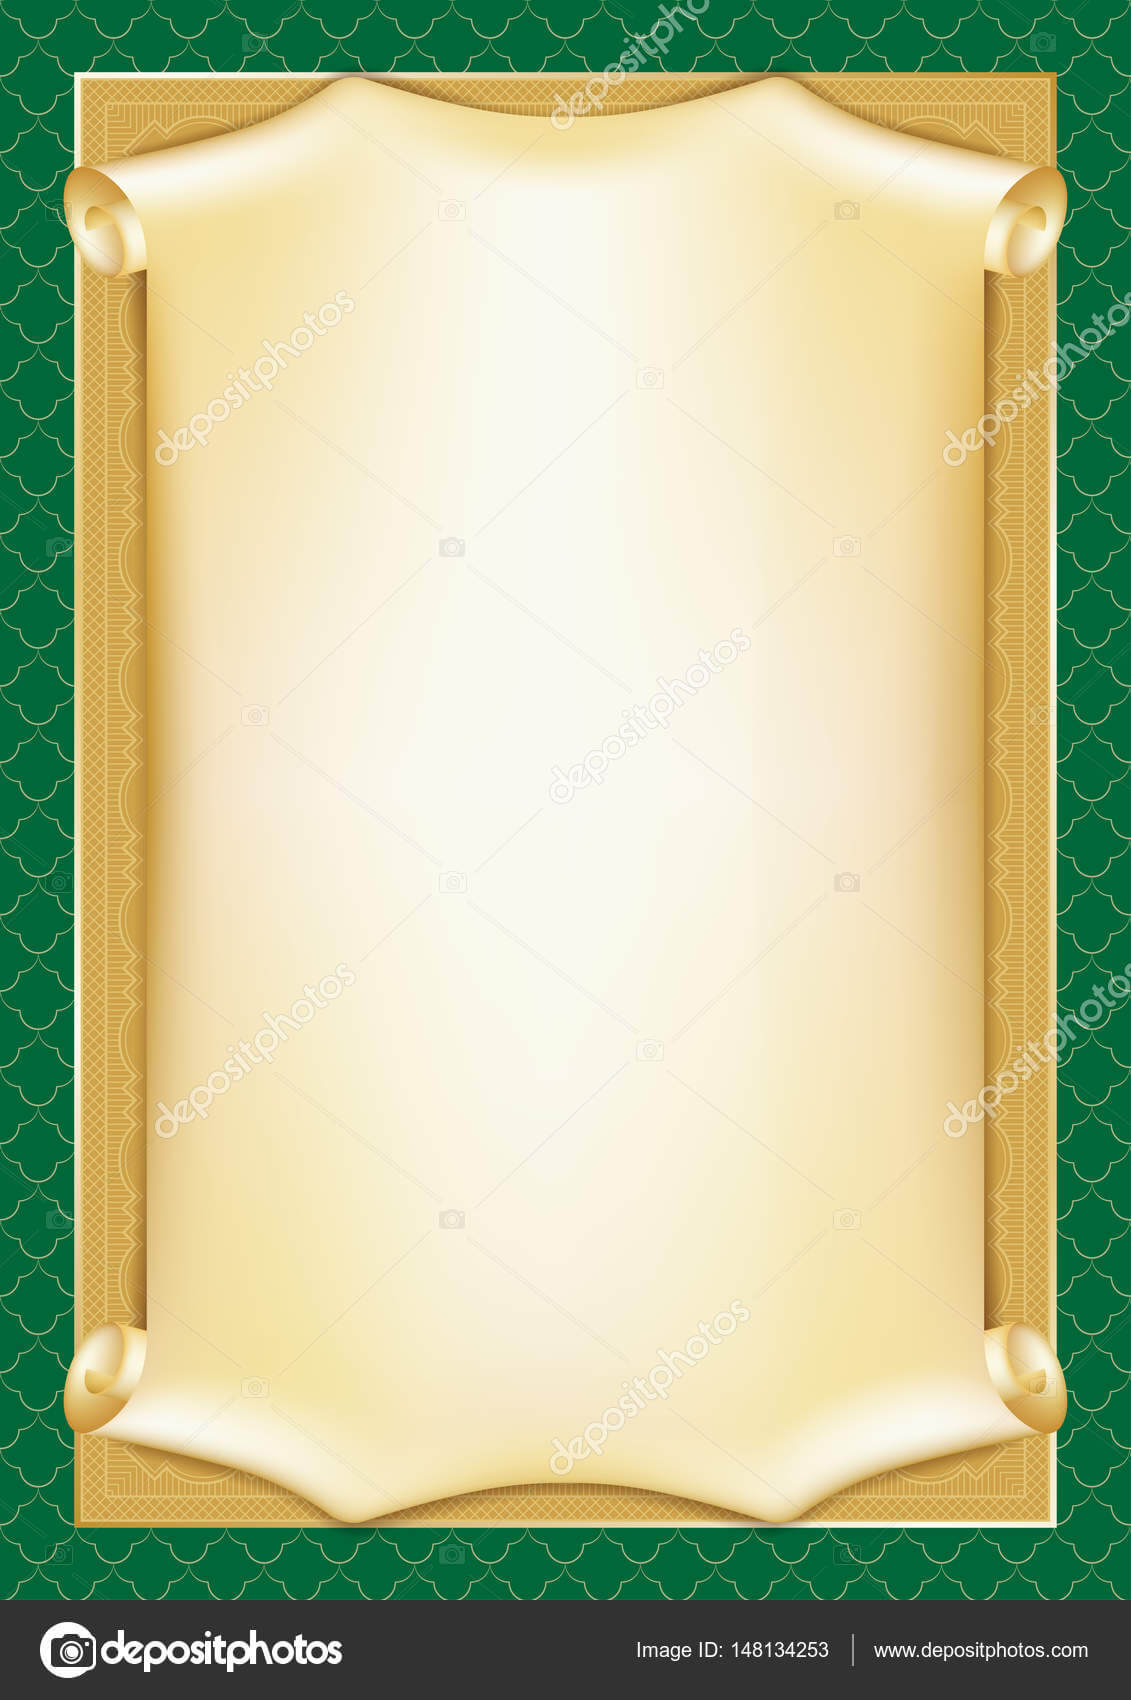 Template For Diploma, Certificate, Card With Scroll And Regarding Certificate Scroll Template